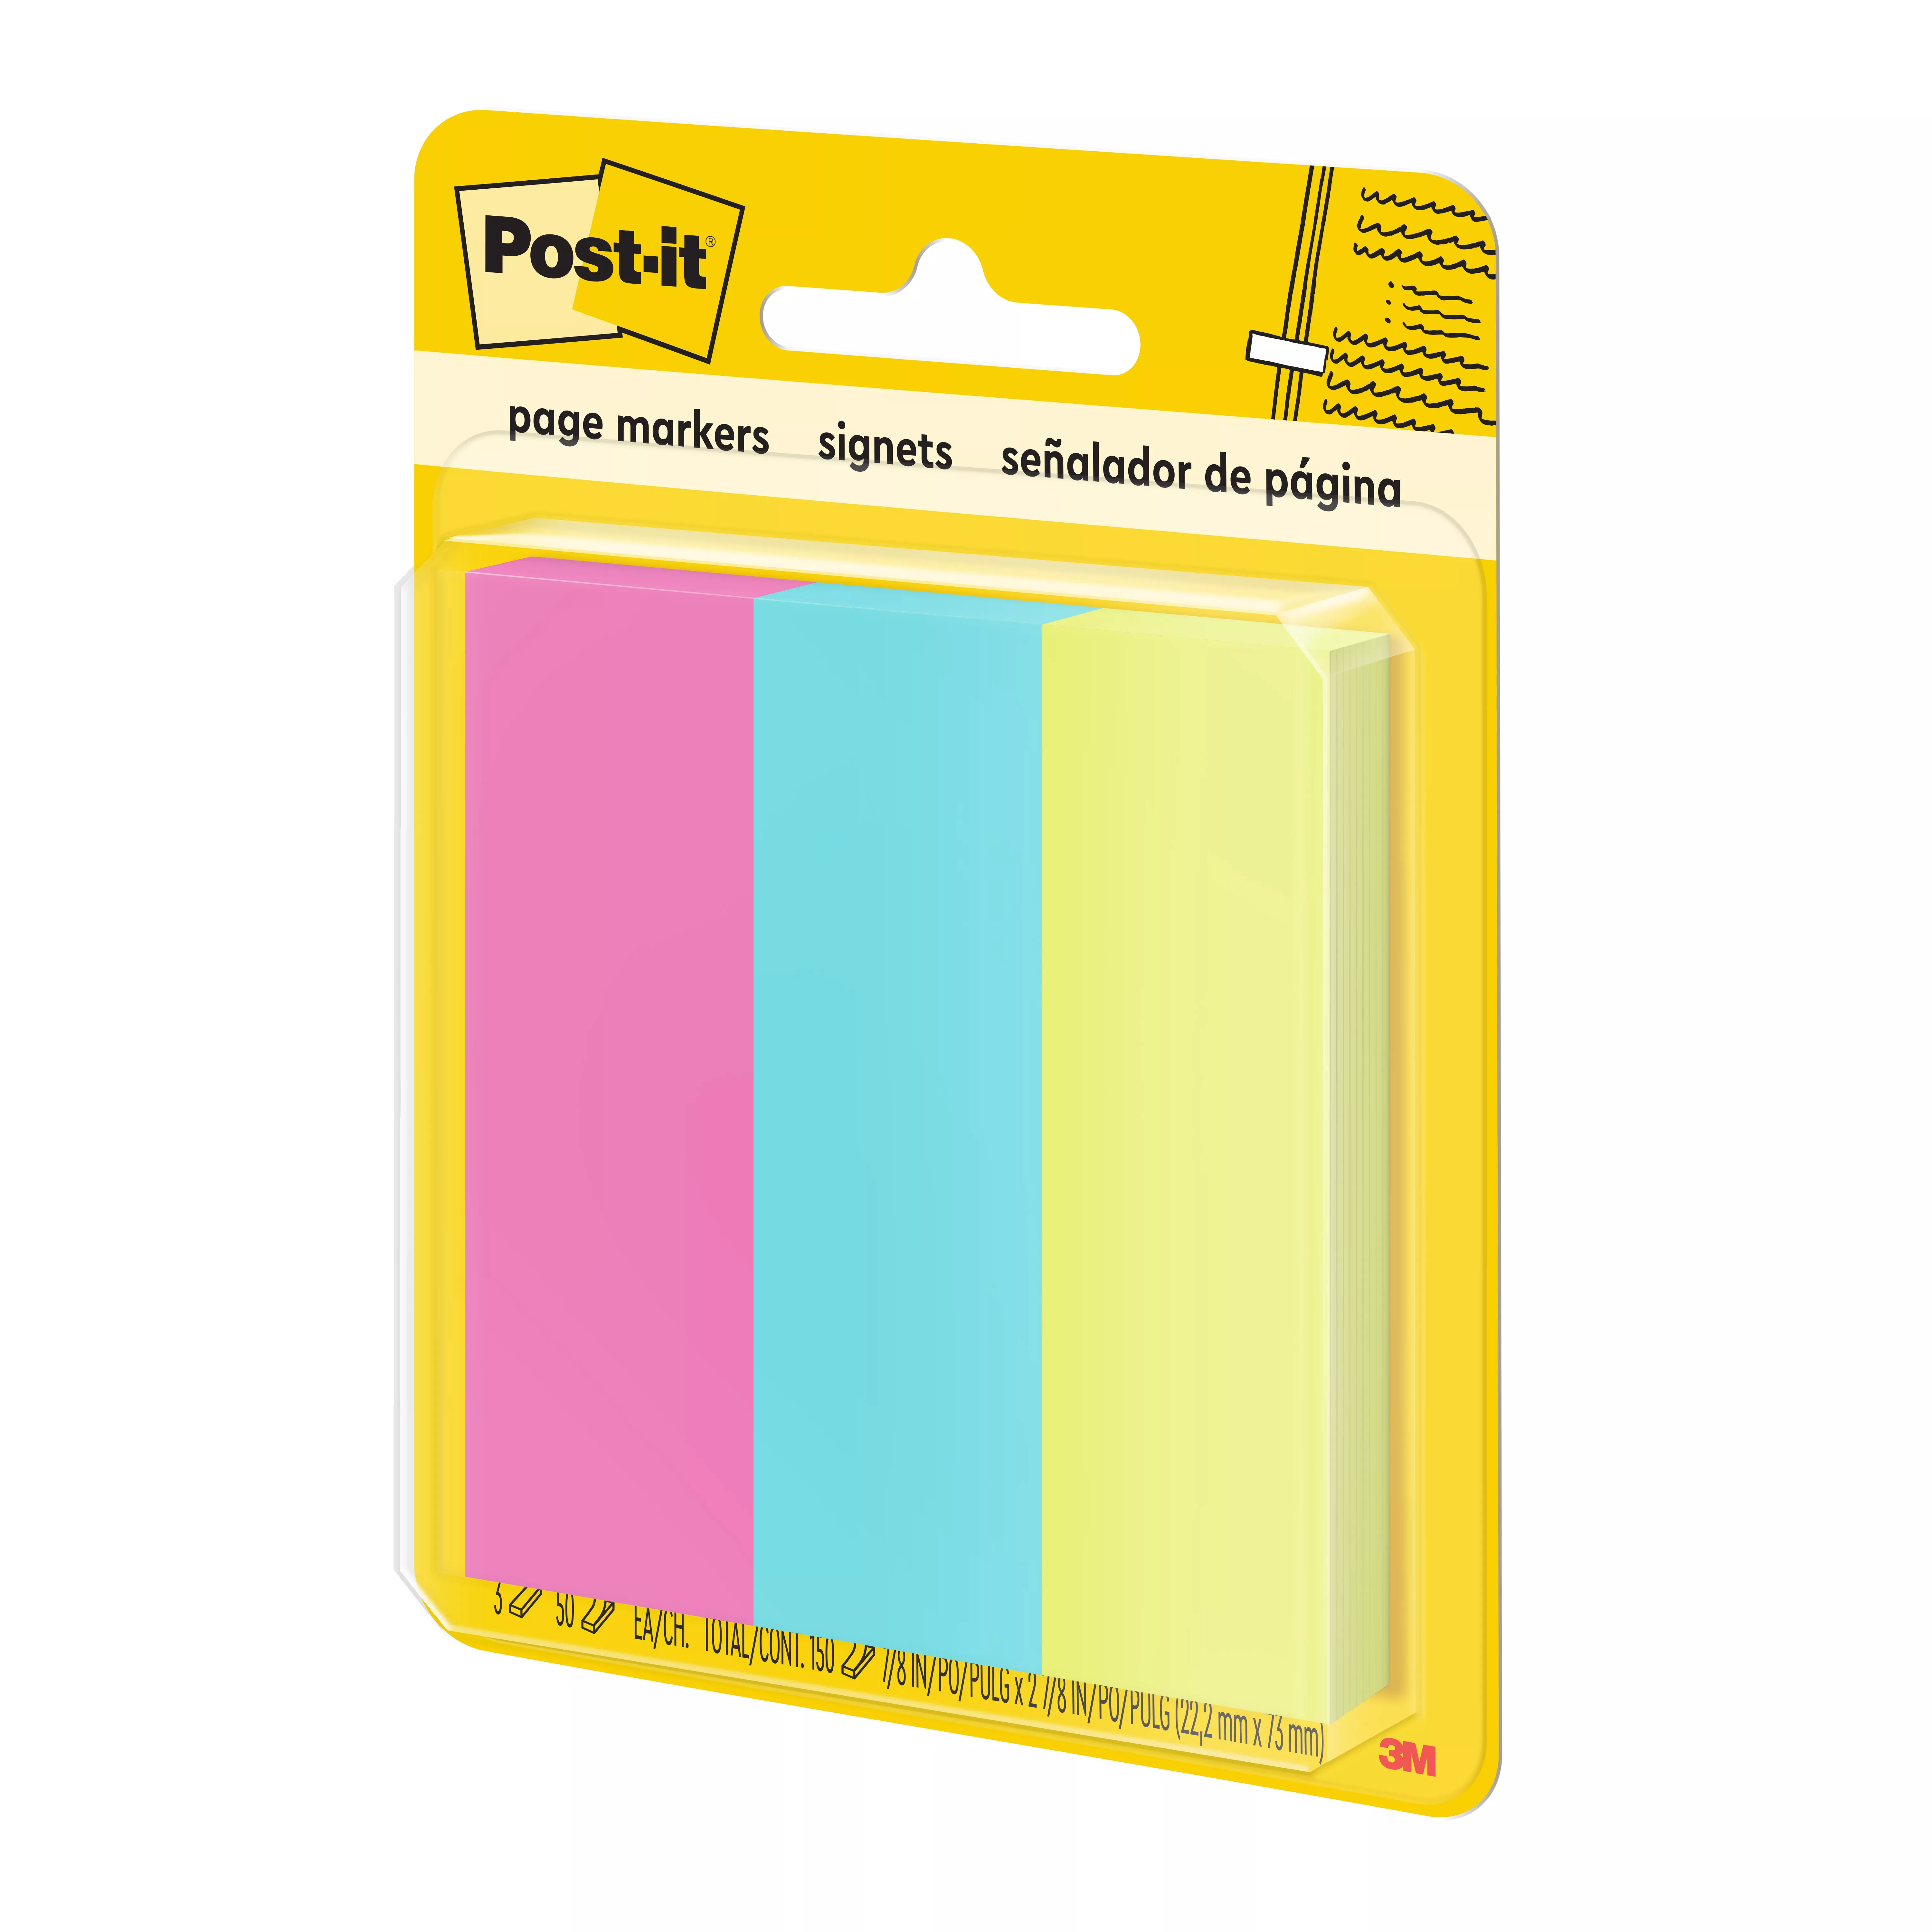 UPC 00051125004428 | Post-it® Page Markers 5223